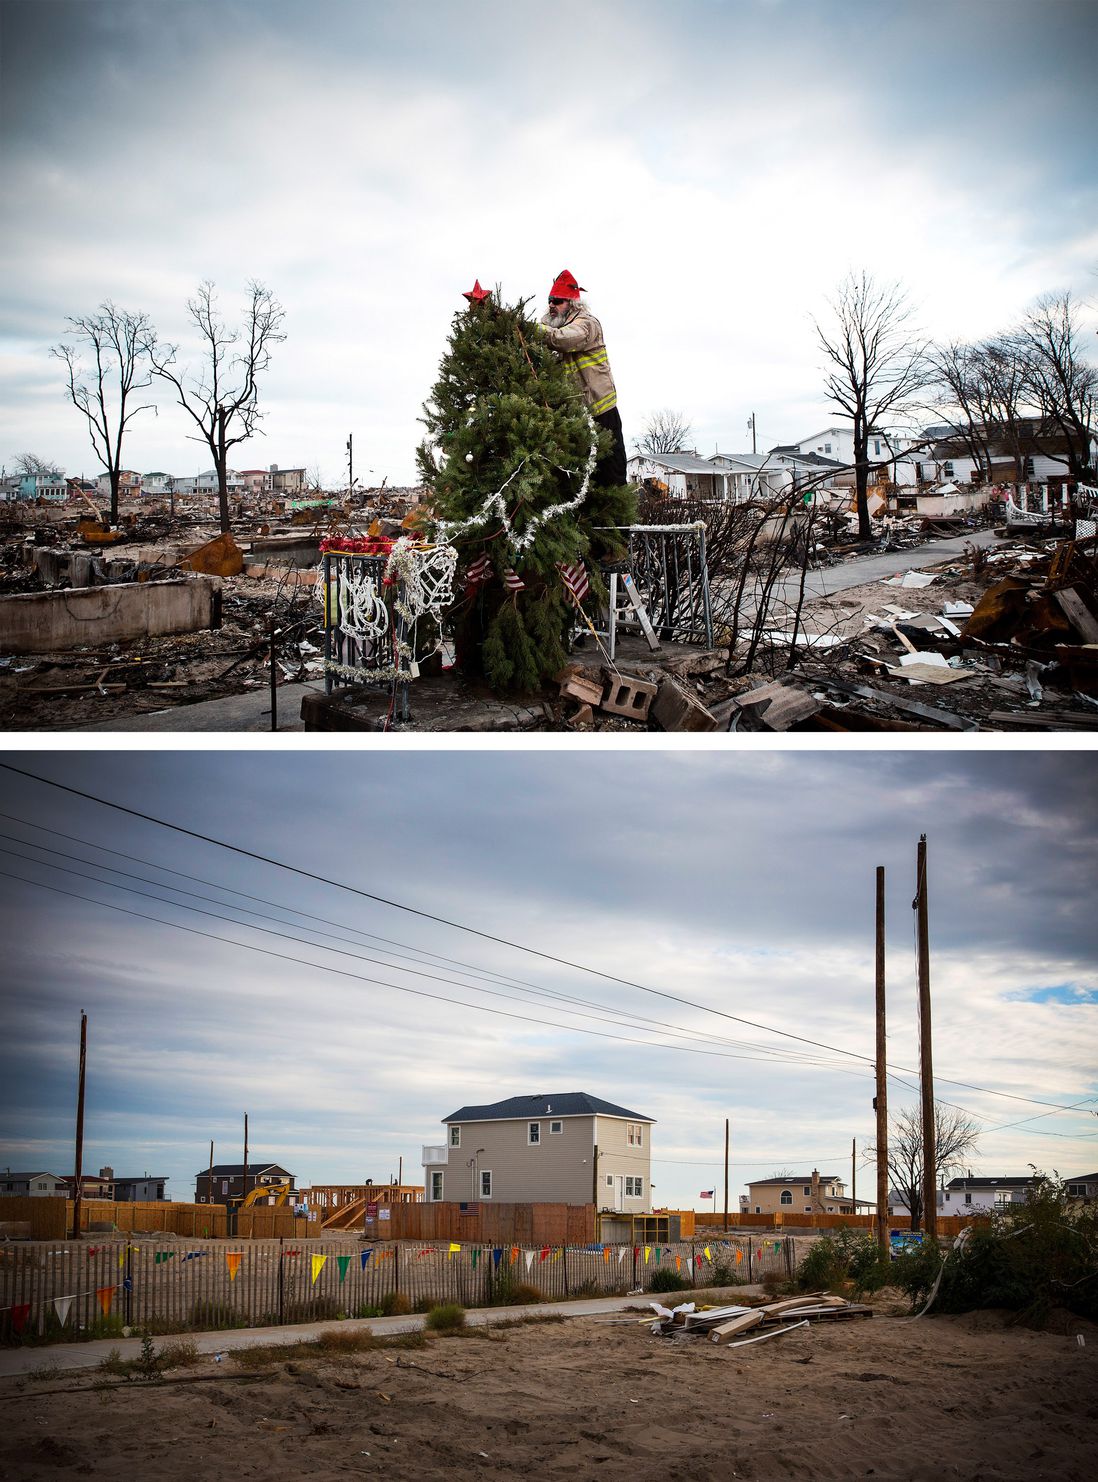 Edward 'Roaddawg' Manley, a volunteer and honory firefighter with the Point Breeze Volunteer Fire Department, places a star on top of a Christmas tree December 25, 2012 in the Breezy Point neighborhood of Queens